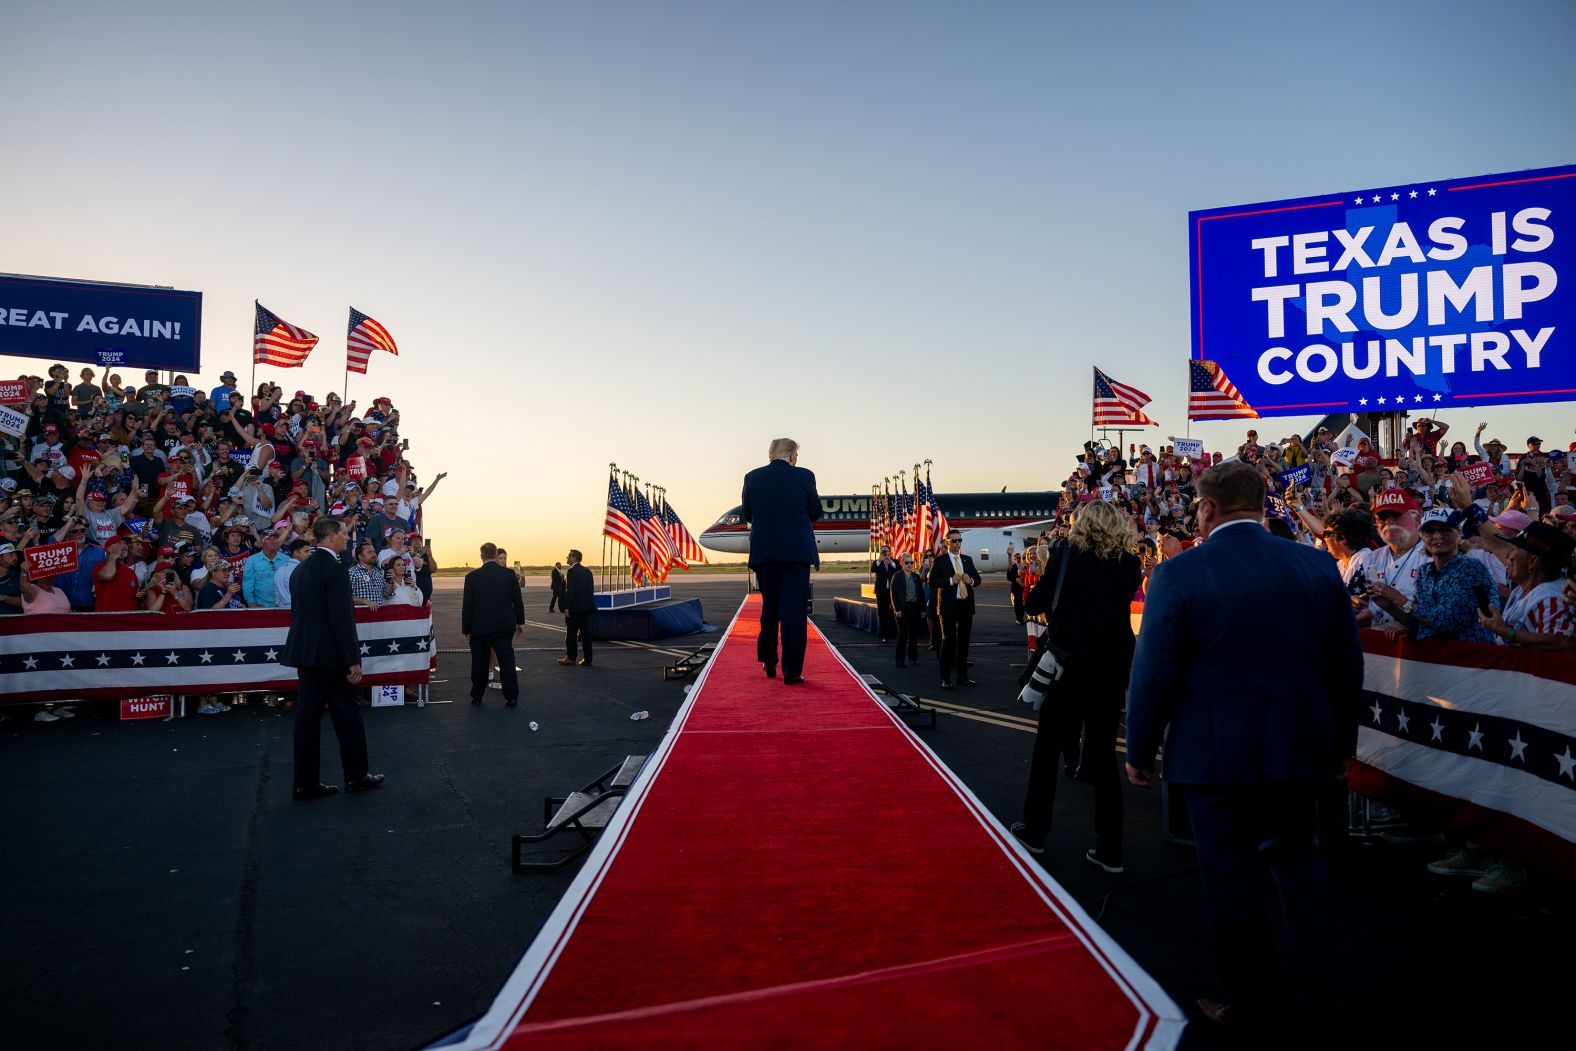 Trump leaves after speaking at his rally in Waco on March 25. Trump, who is running for president again, <a href="index.php?page=&url=https%3A%2F%2Fwww.cnn.com%2F2023%2F03%2F25%2Fpolitics%2Ftexas-trump-2024-rally%2Findex.html" target="_blank">railed against what he called "prosecutorial misconduct"</a> and denied any wrongdoing amid investigations in New York, Georgia and Washington, DC.